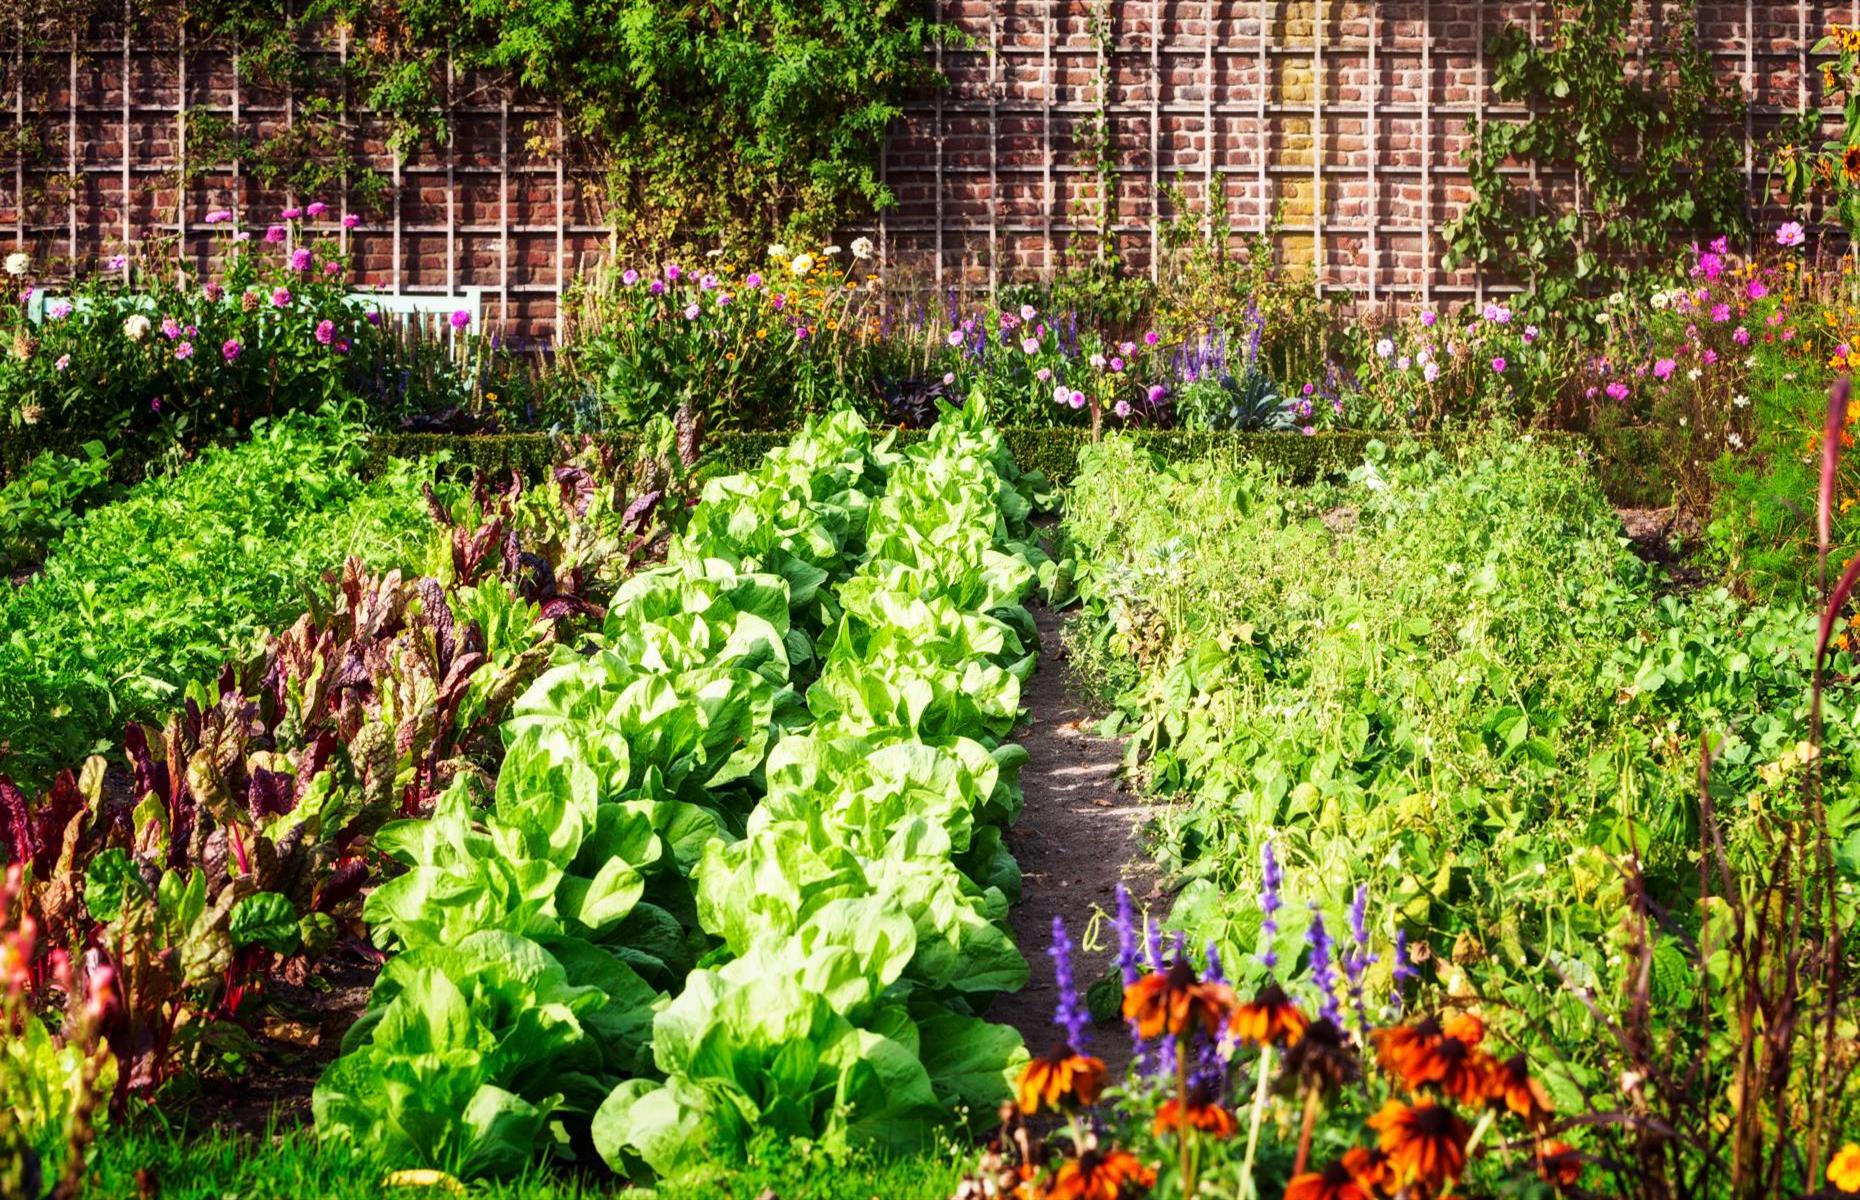 <p>When <a href="https://www.loveproperty.com/news/72799/how-to-start-a-garden">planning your vegetable garden</a>, the first thing to consider is light. Most vegetables and fruits will grow best in full sunshine. Choose a spot that receives at least six, preferably eight hours of full sunshine every day. Some vegetables like cabbage, spinach and radishes can be grown in part shade but no crops will thrive in deep shade. Make sure you pick an area that’s level as this makes watering evenly easier.</p>